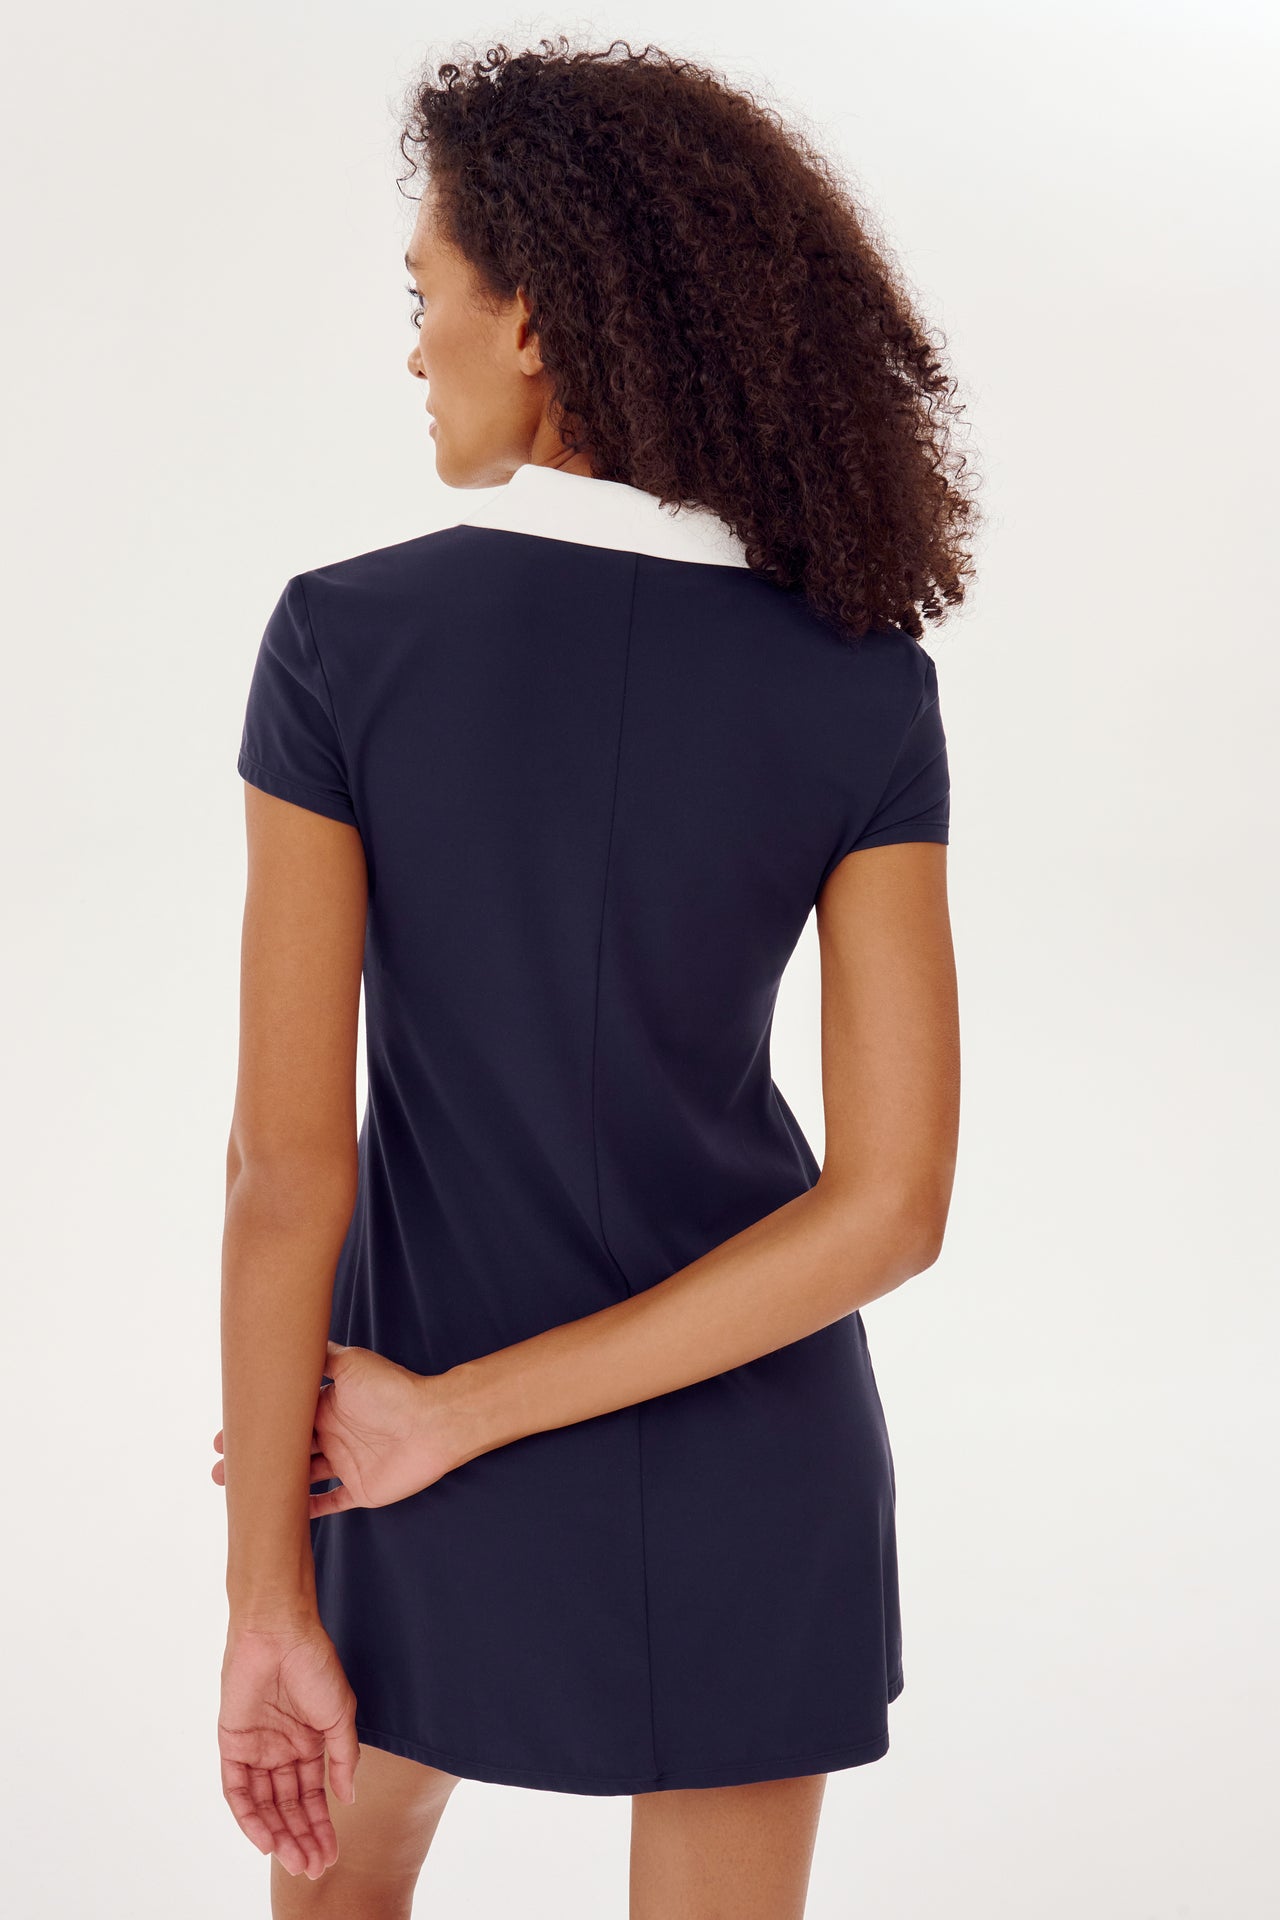 The back view of a woman wearing a SPLITS59 Polo Airweight Dress in Indigo with white collar.